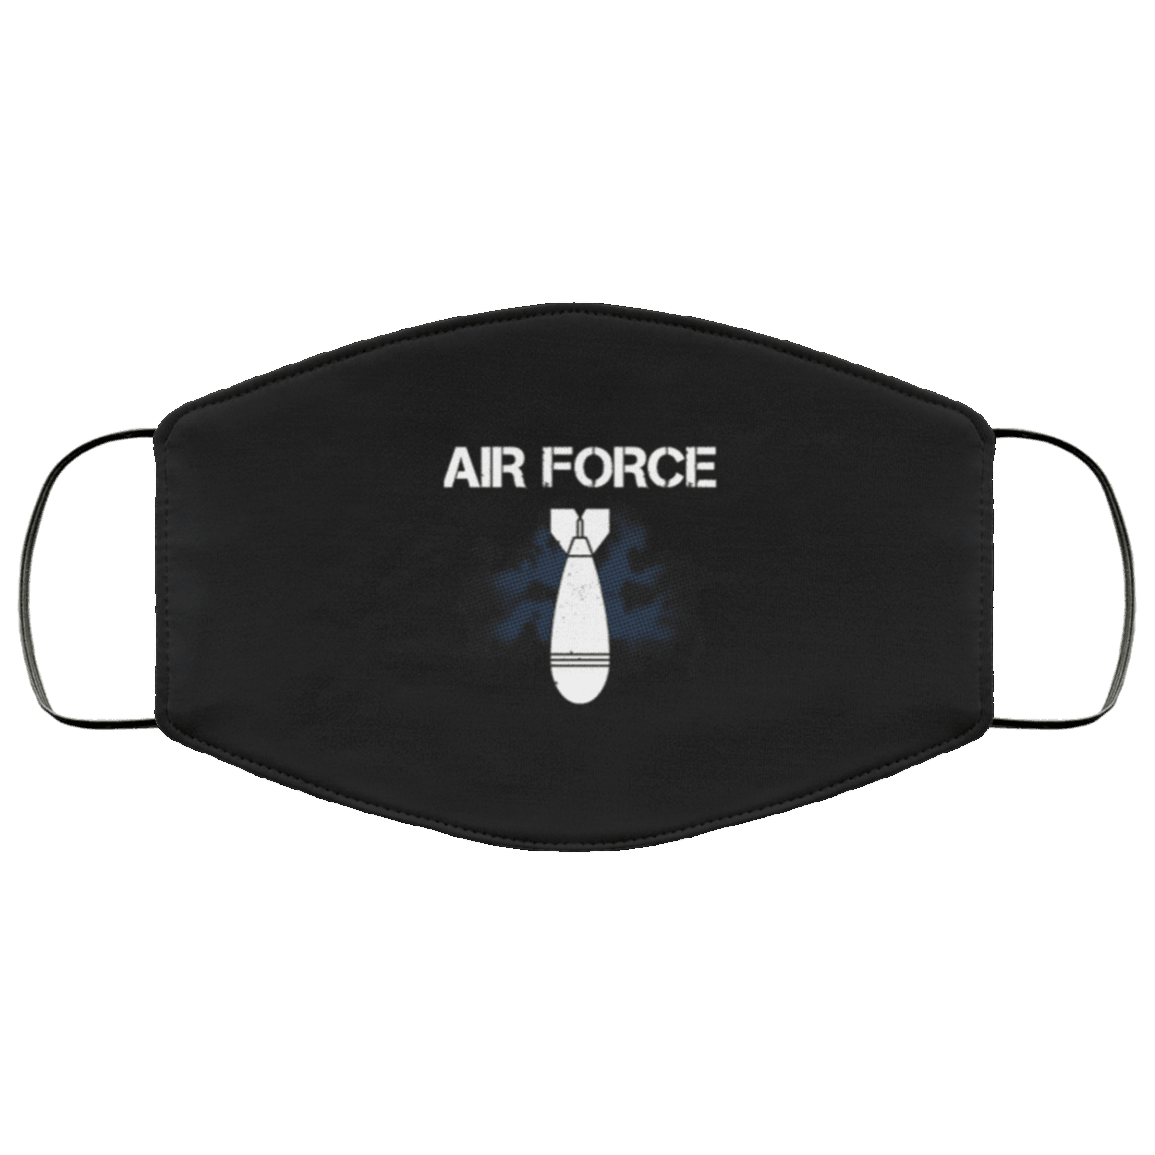 Designs by MyUtopia Shout Out:Air Force Bomb Adult Fabric Face Mask with Elastic Ear Loops,3 Layer Fabric Face Mask / Black / Adult,Fabric Face Mask